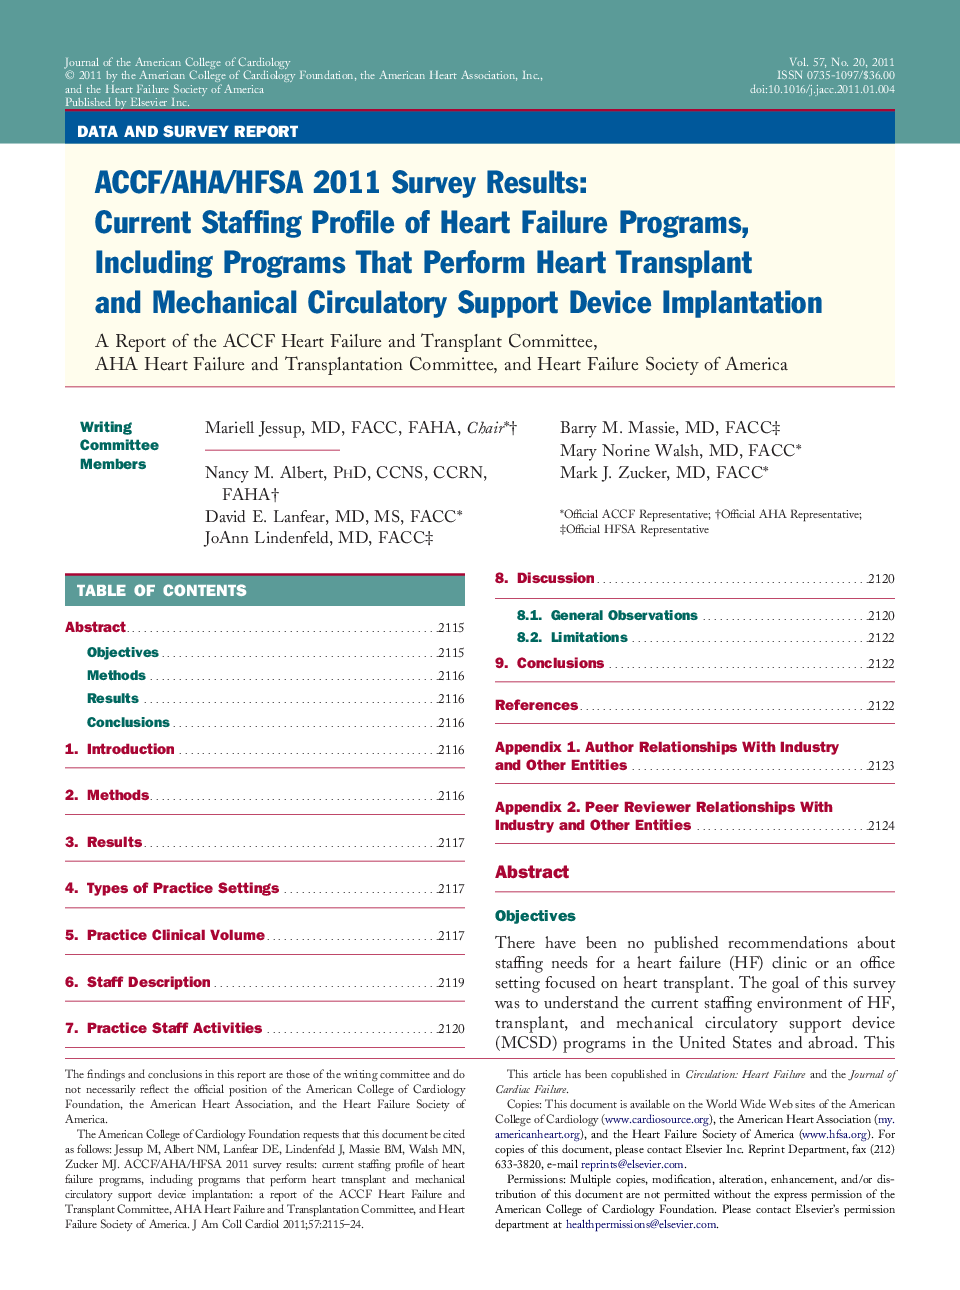 ACCF/AHA/HFSA 2011 Survey Results: Current Staffing Profile of Heart Failure Programs, Including Programs That Perform Heart Transplant and Mechanical Circulatory Support Device Implantation